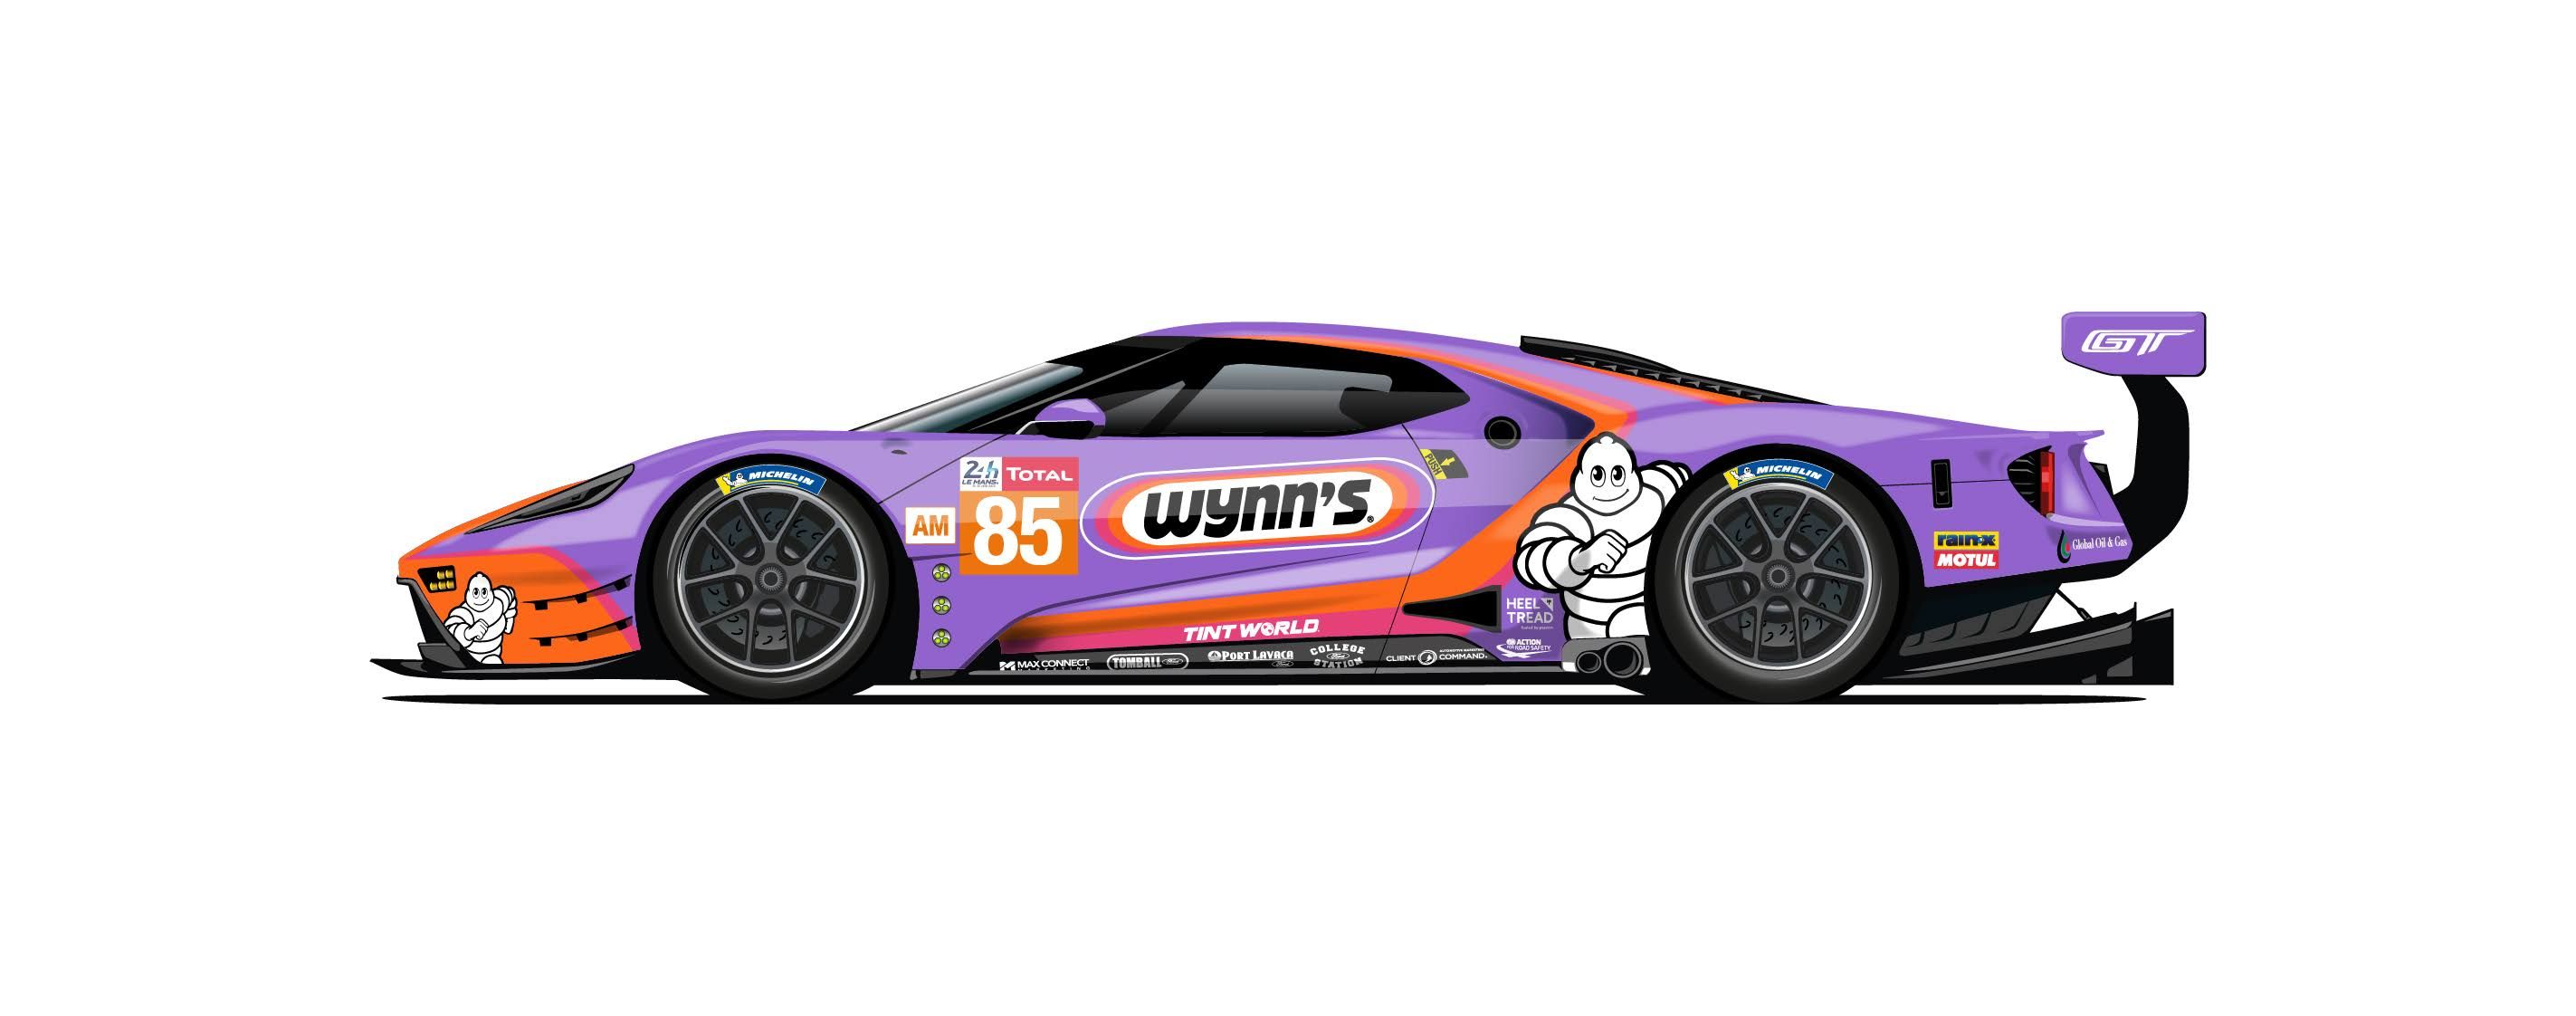 Nostalgia alert) Ford GT LM race car first appearing in GT4, made with  outlining and self-made colouring and shading. : r/carart